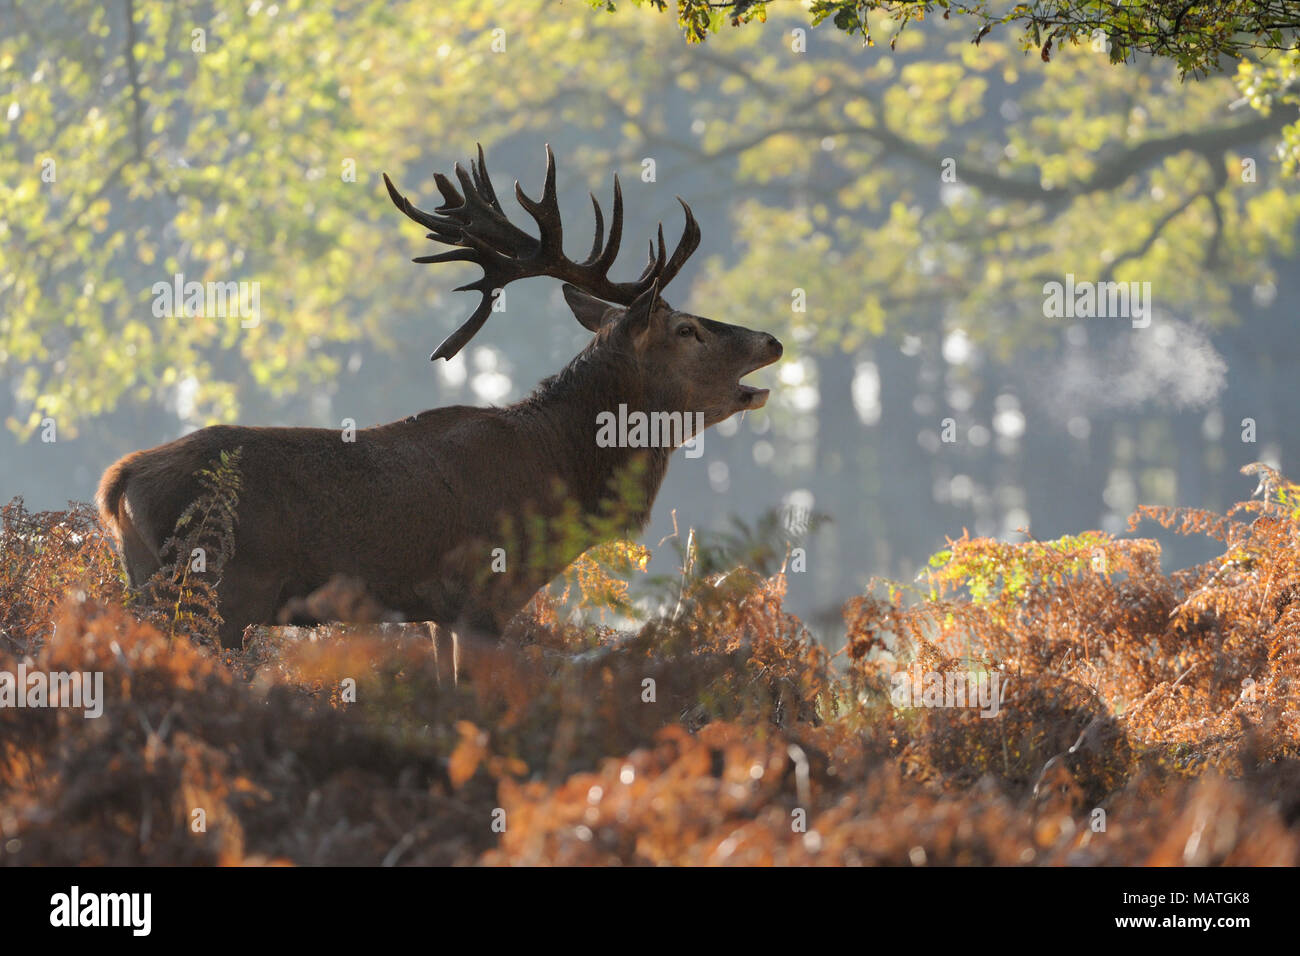 Red Deer / Rothirsch ( Cervus elaphus ) stag during rut, stands in fern at the edge of a forest, calling, roaring, visible breath cloud, Europe. Stock Photo